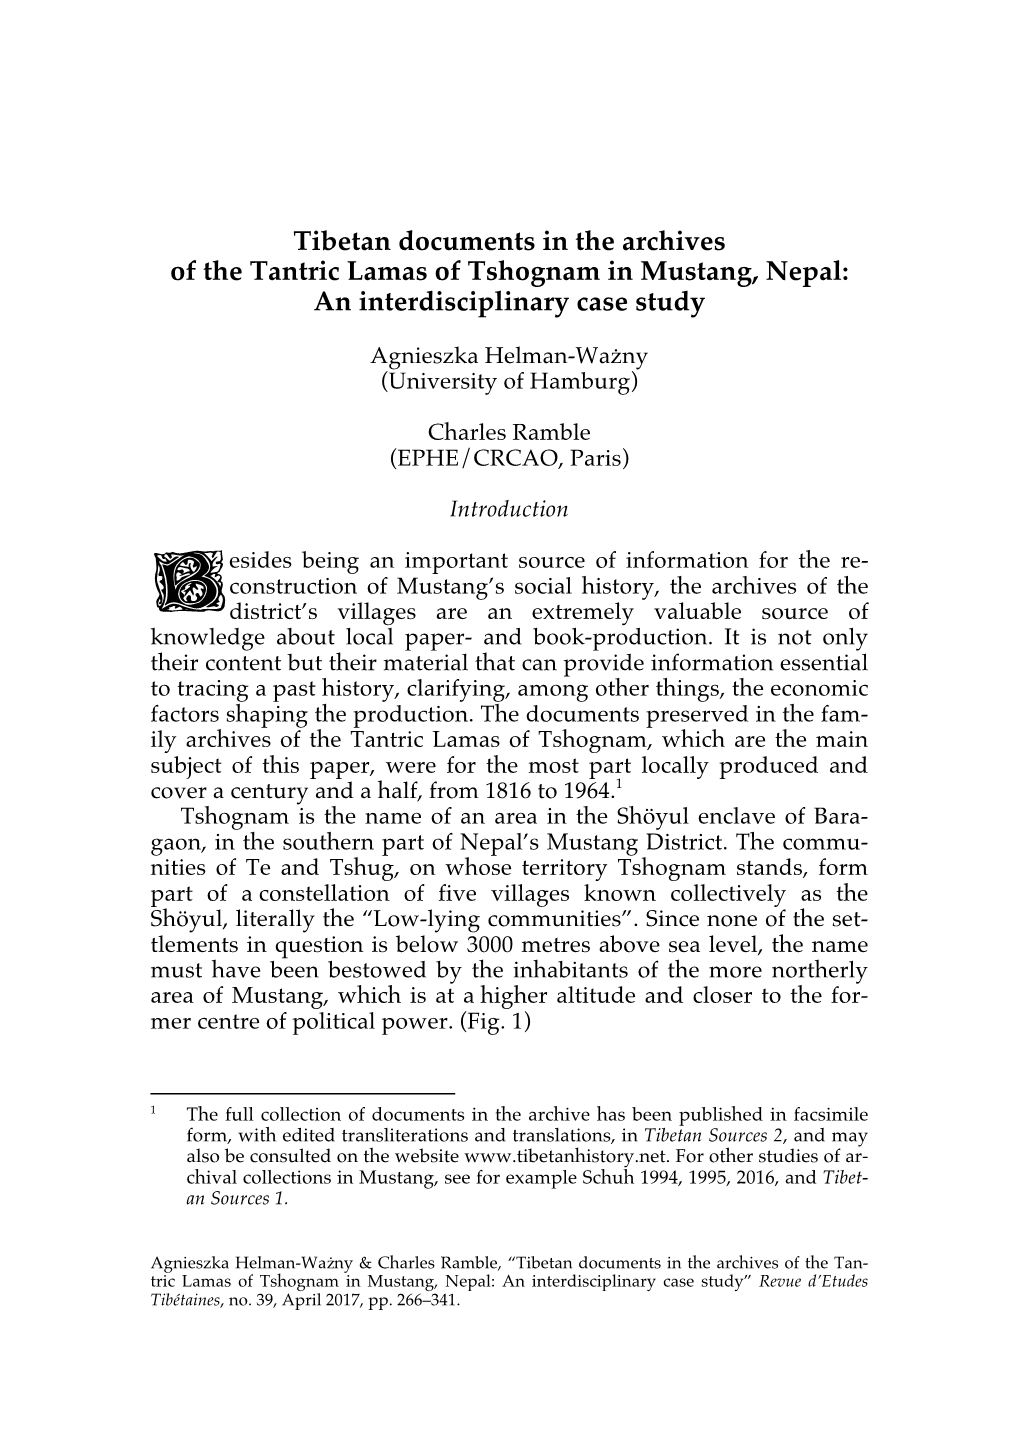 Tibetan Documents in the Archives of the Tantric Lamas of Tshognam in Mustang, Nepal: an Interdisciplinary Case Study